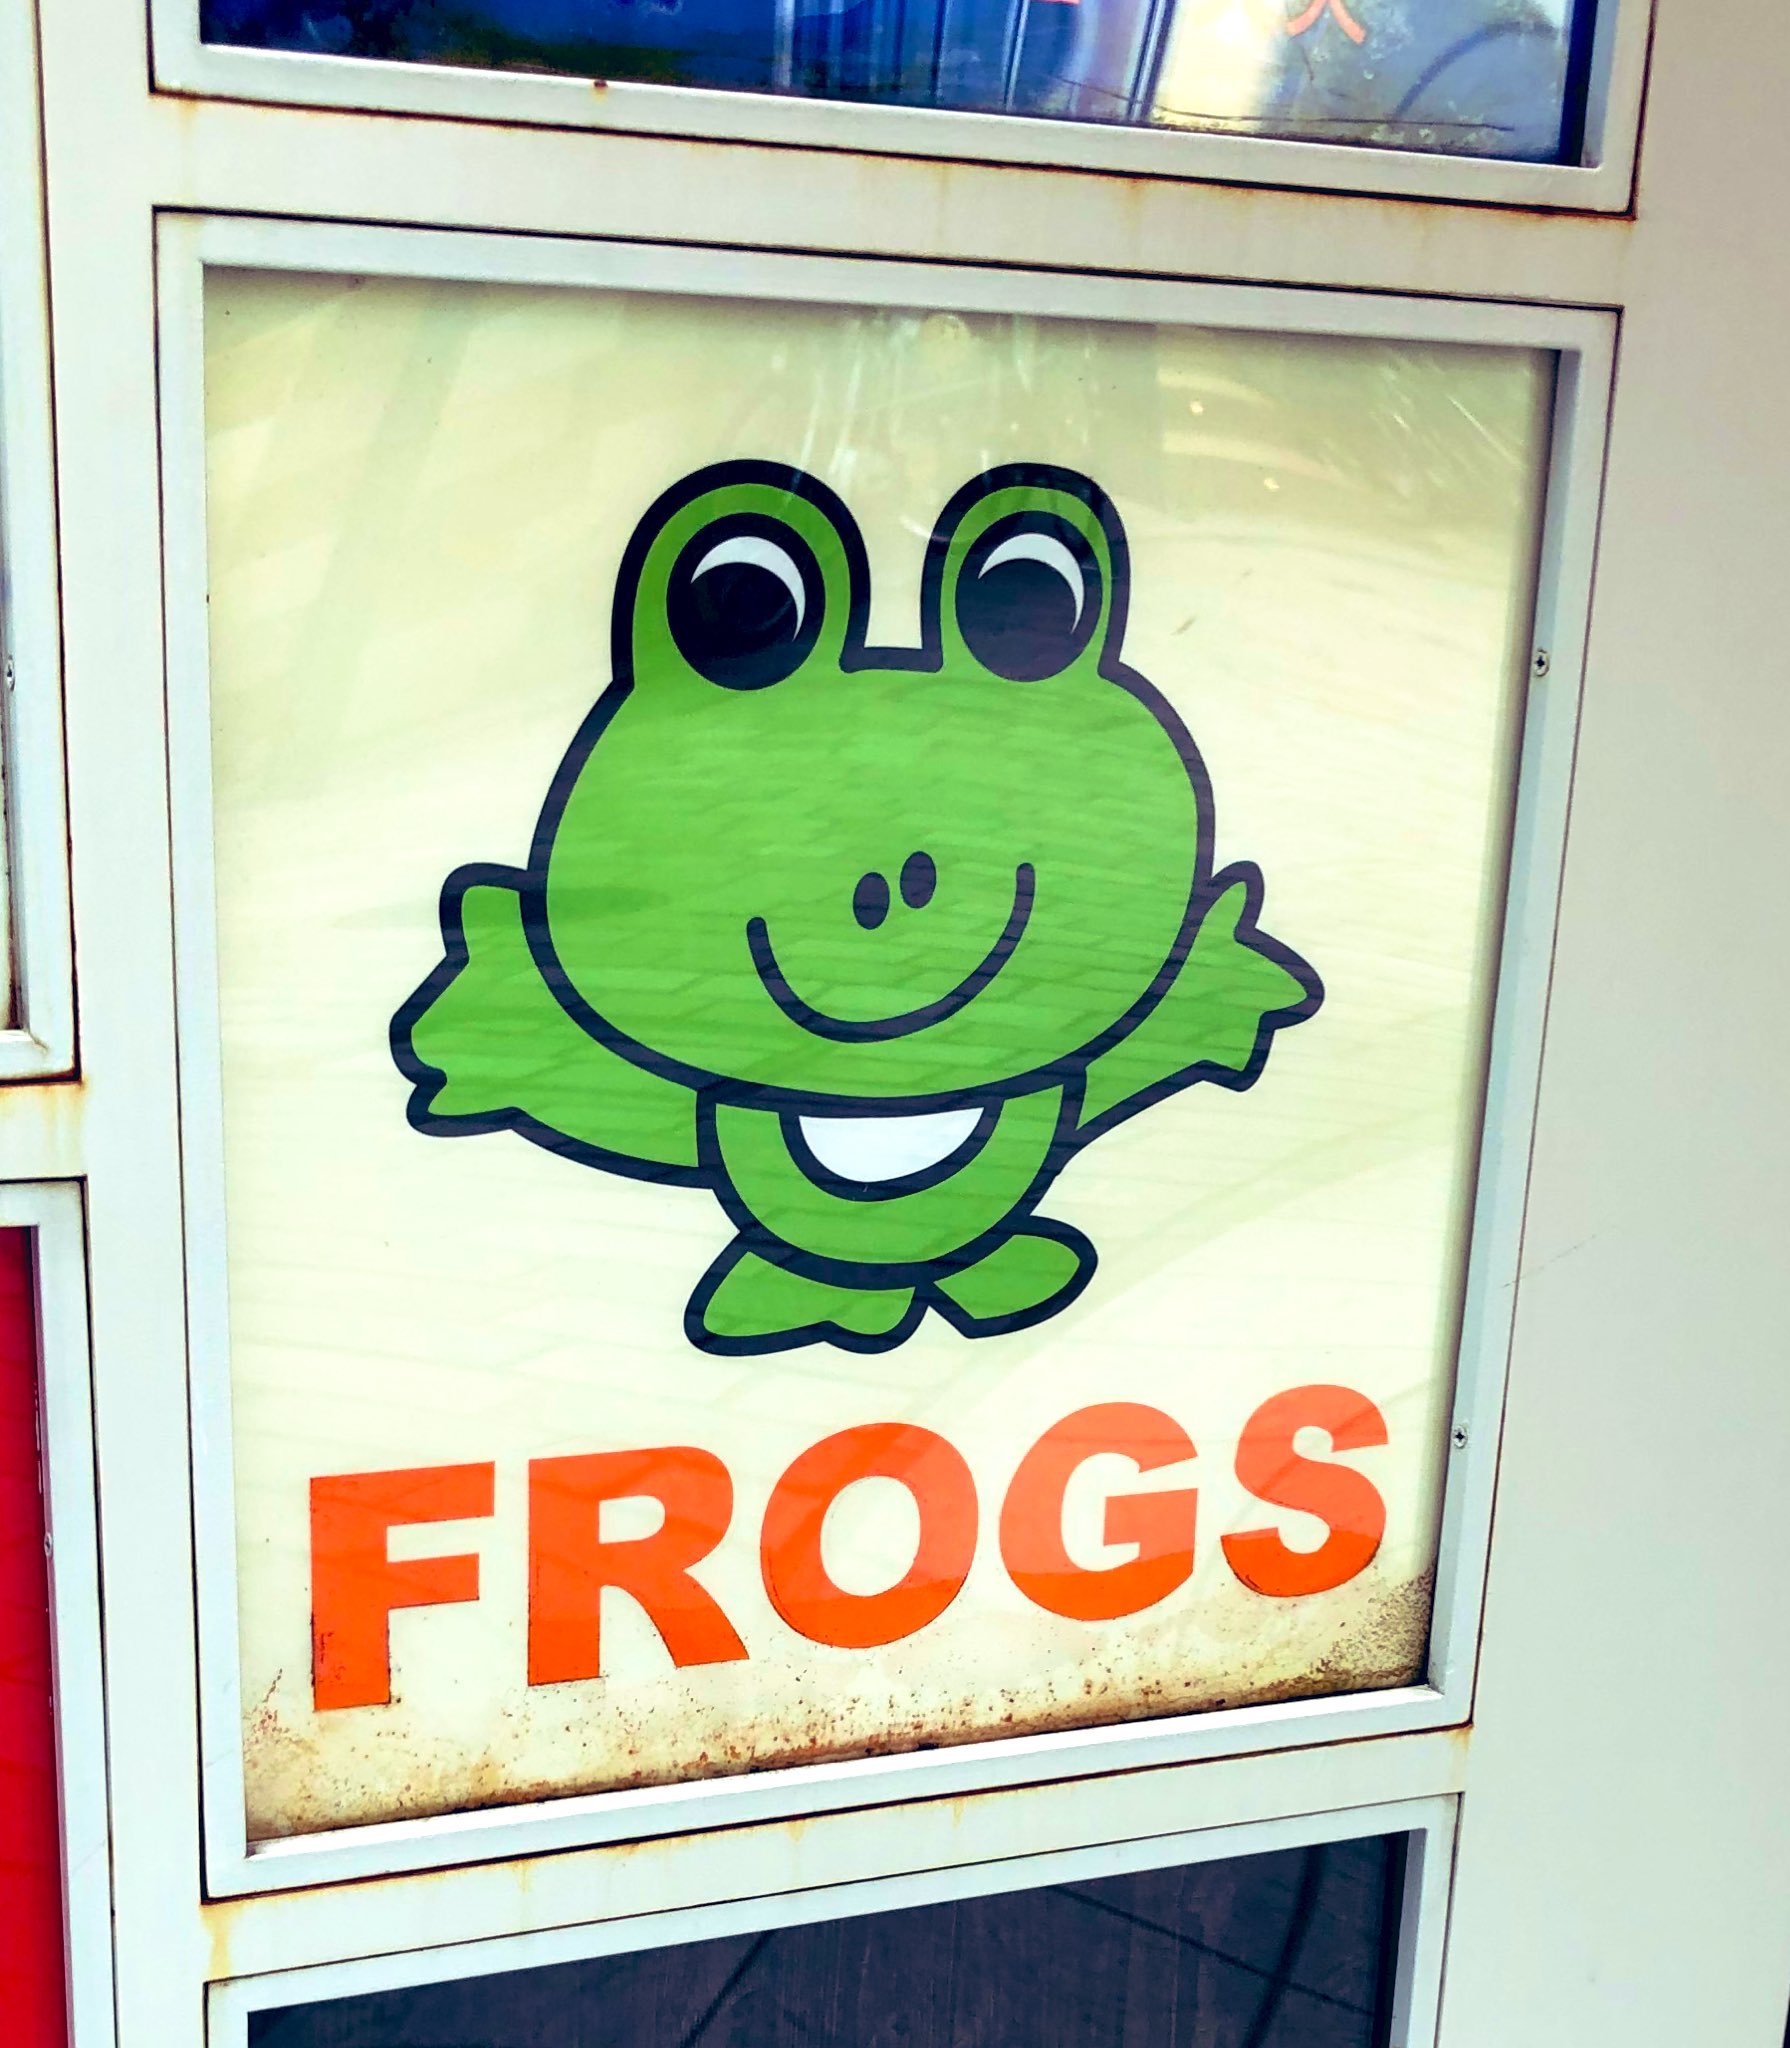 Chris C on X: I just walked past a shop in Tokyo called Frogs